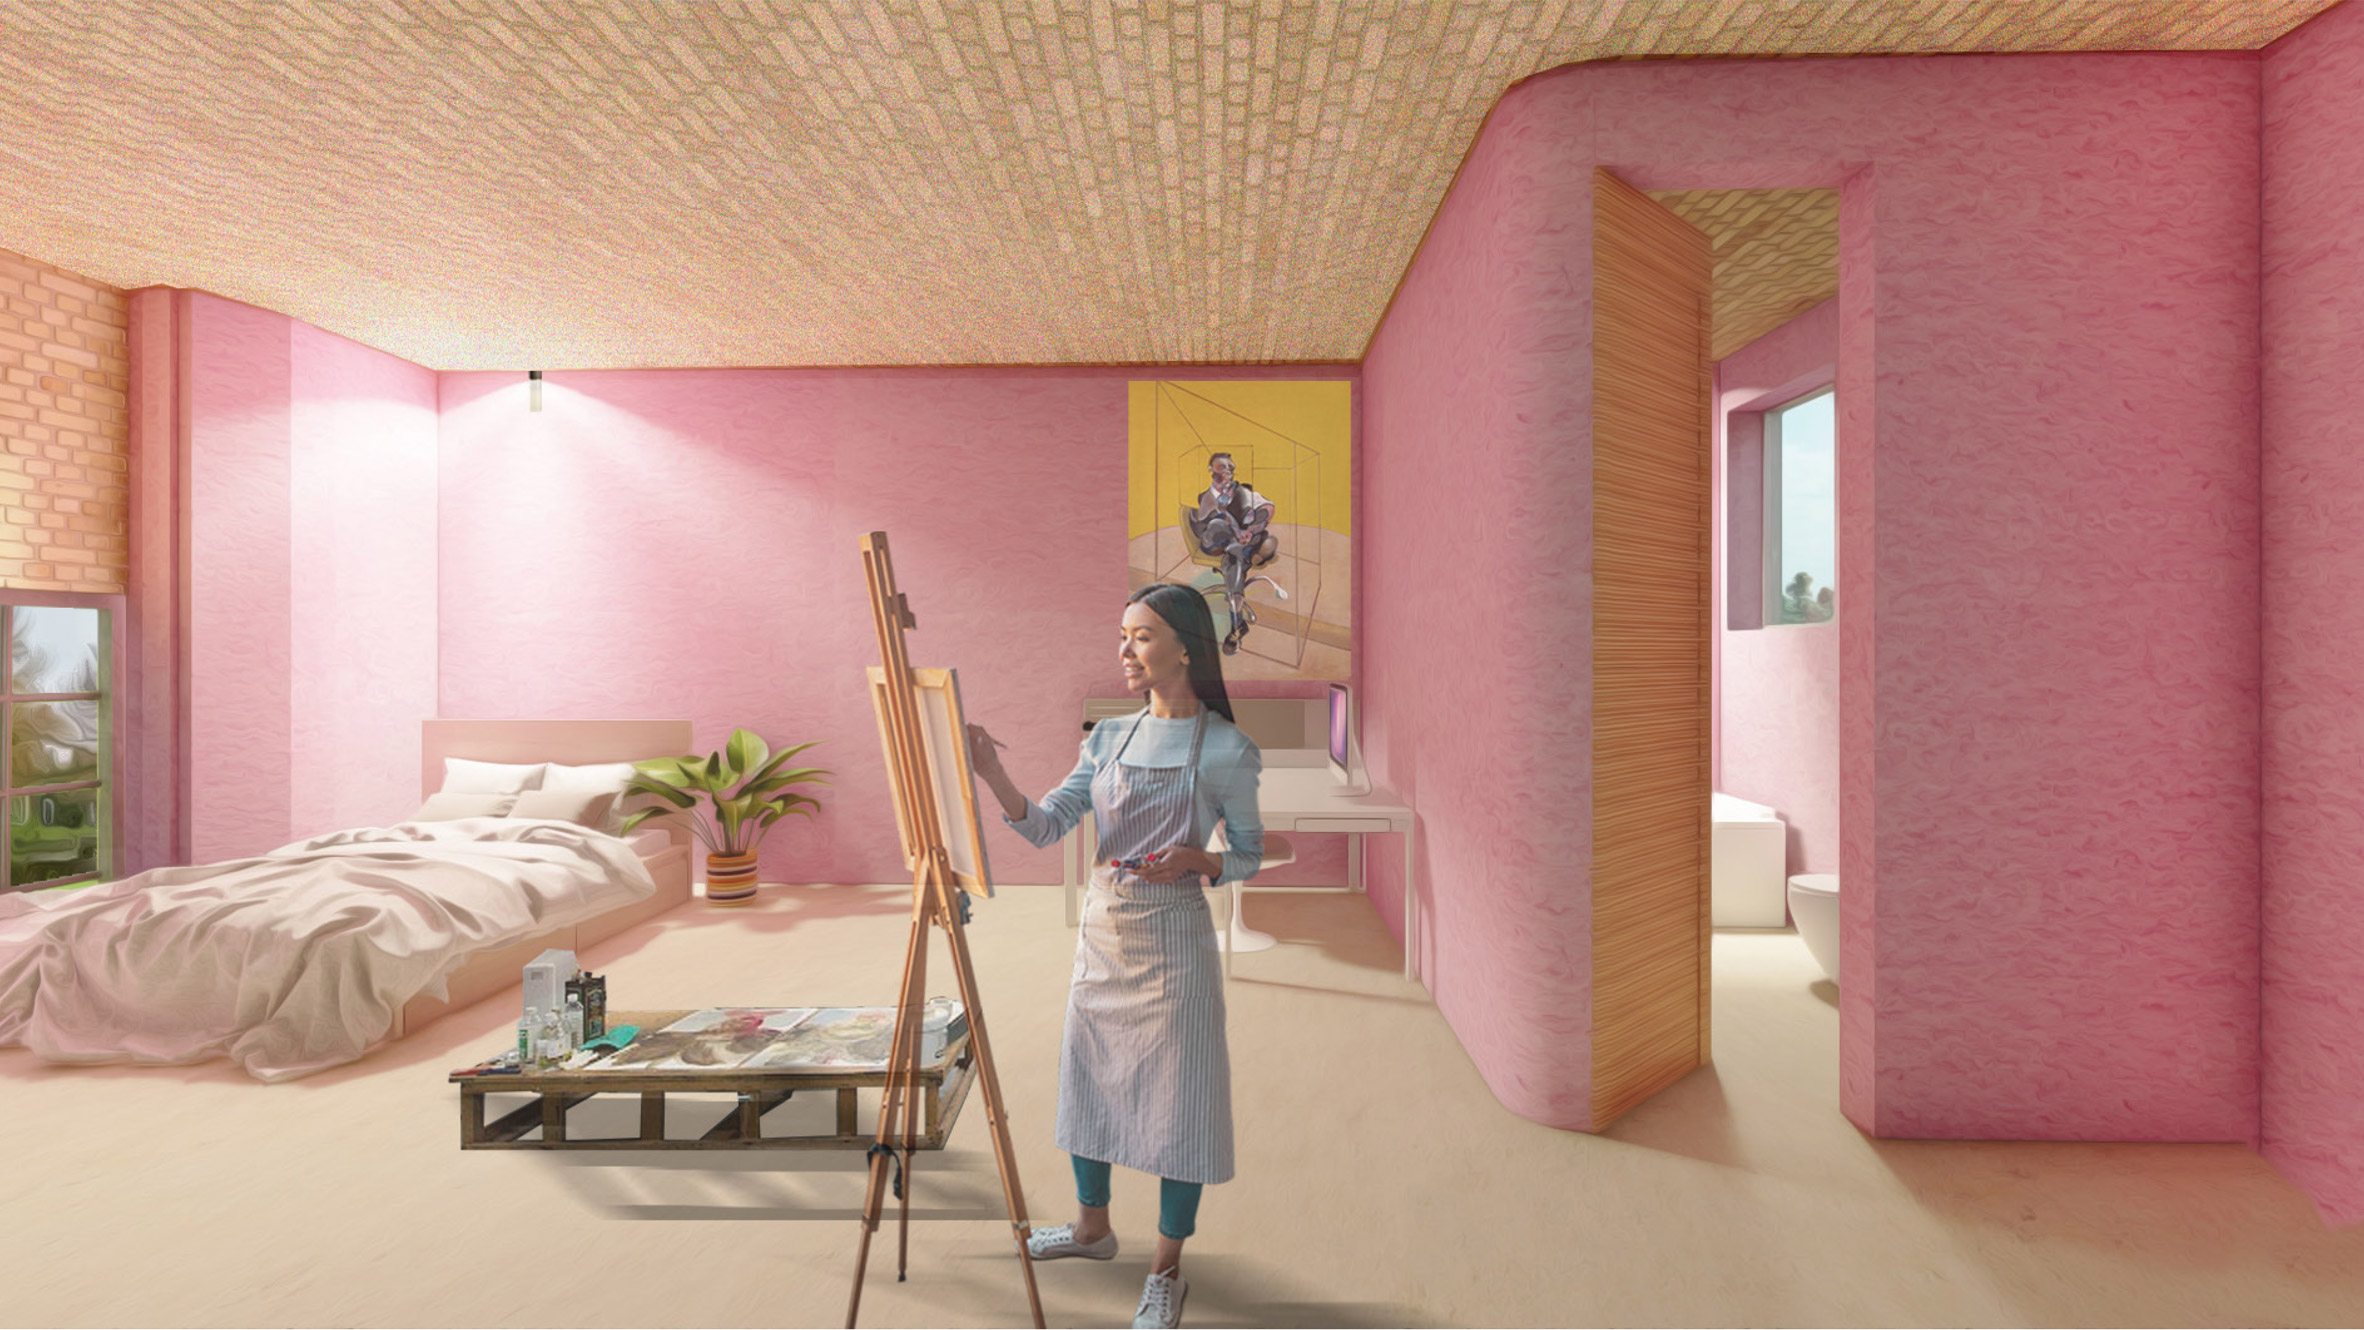 Pink interior bedroom with a person painting on an easel